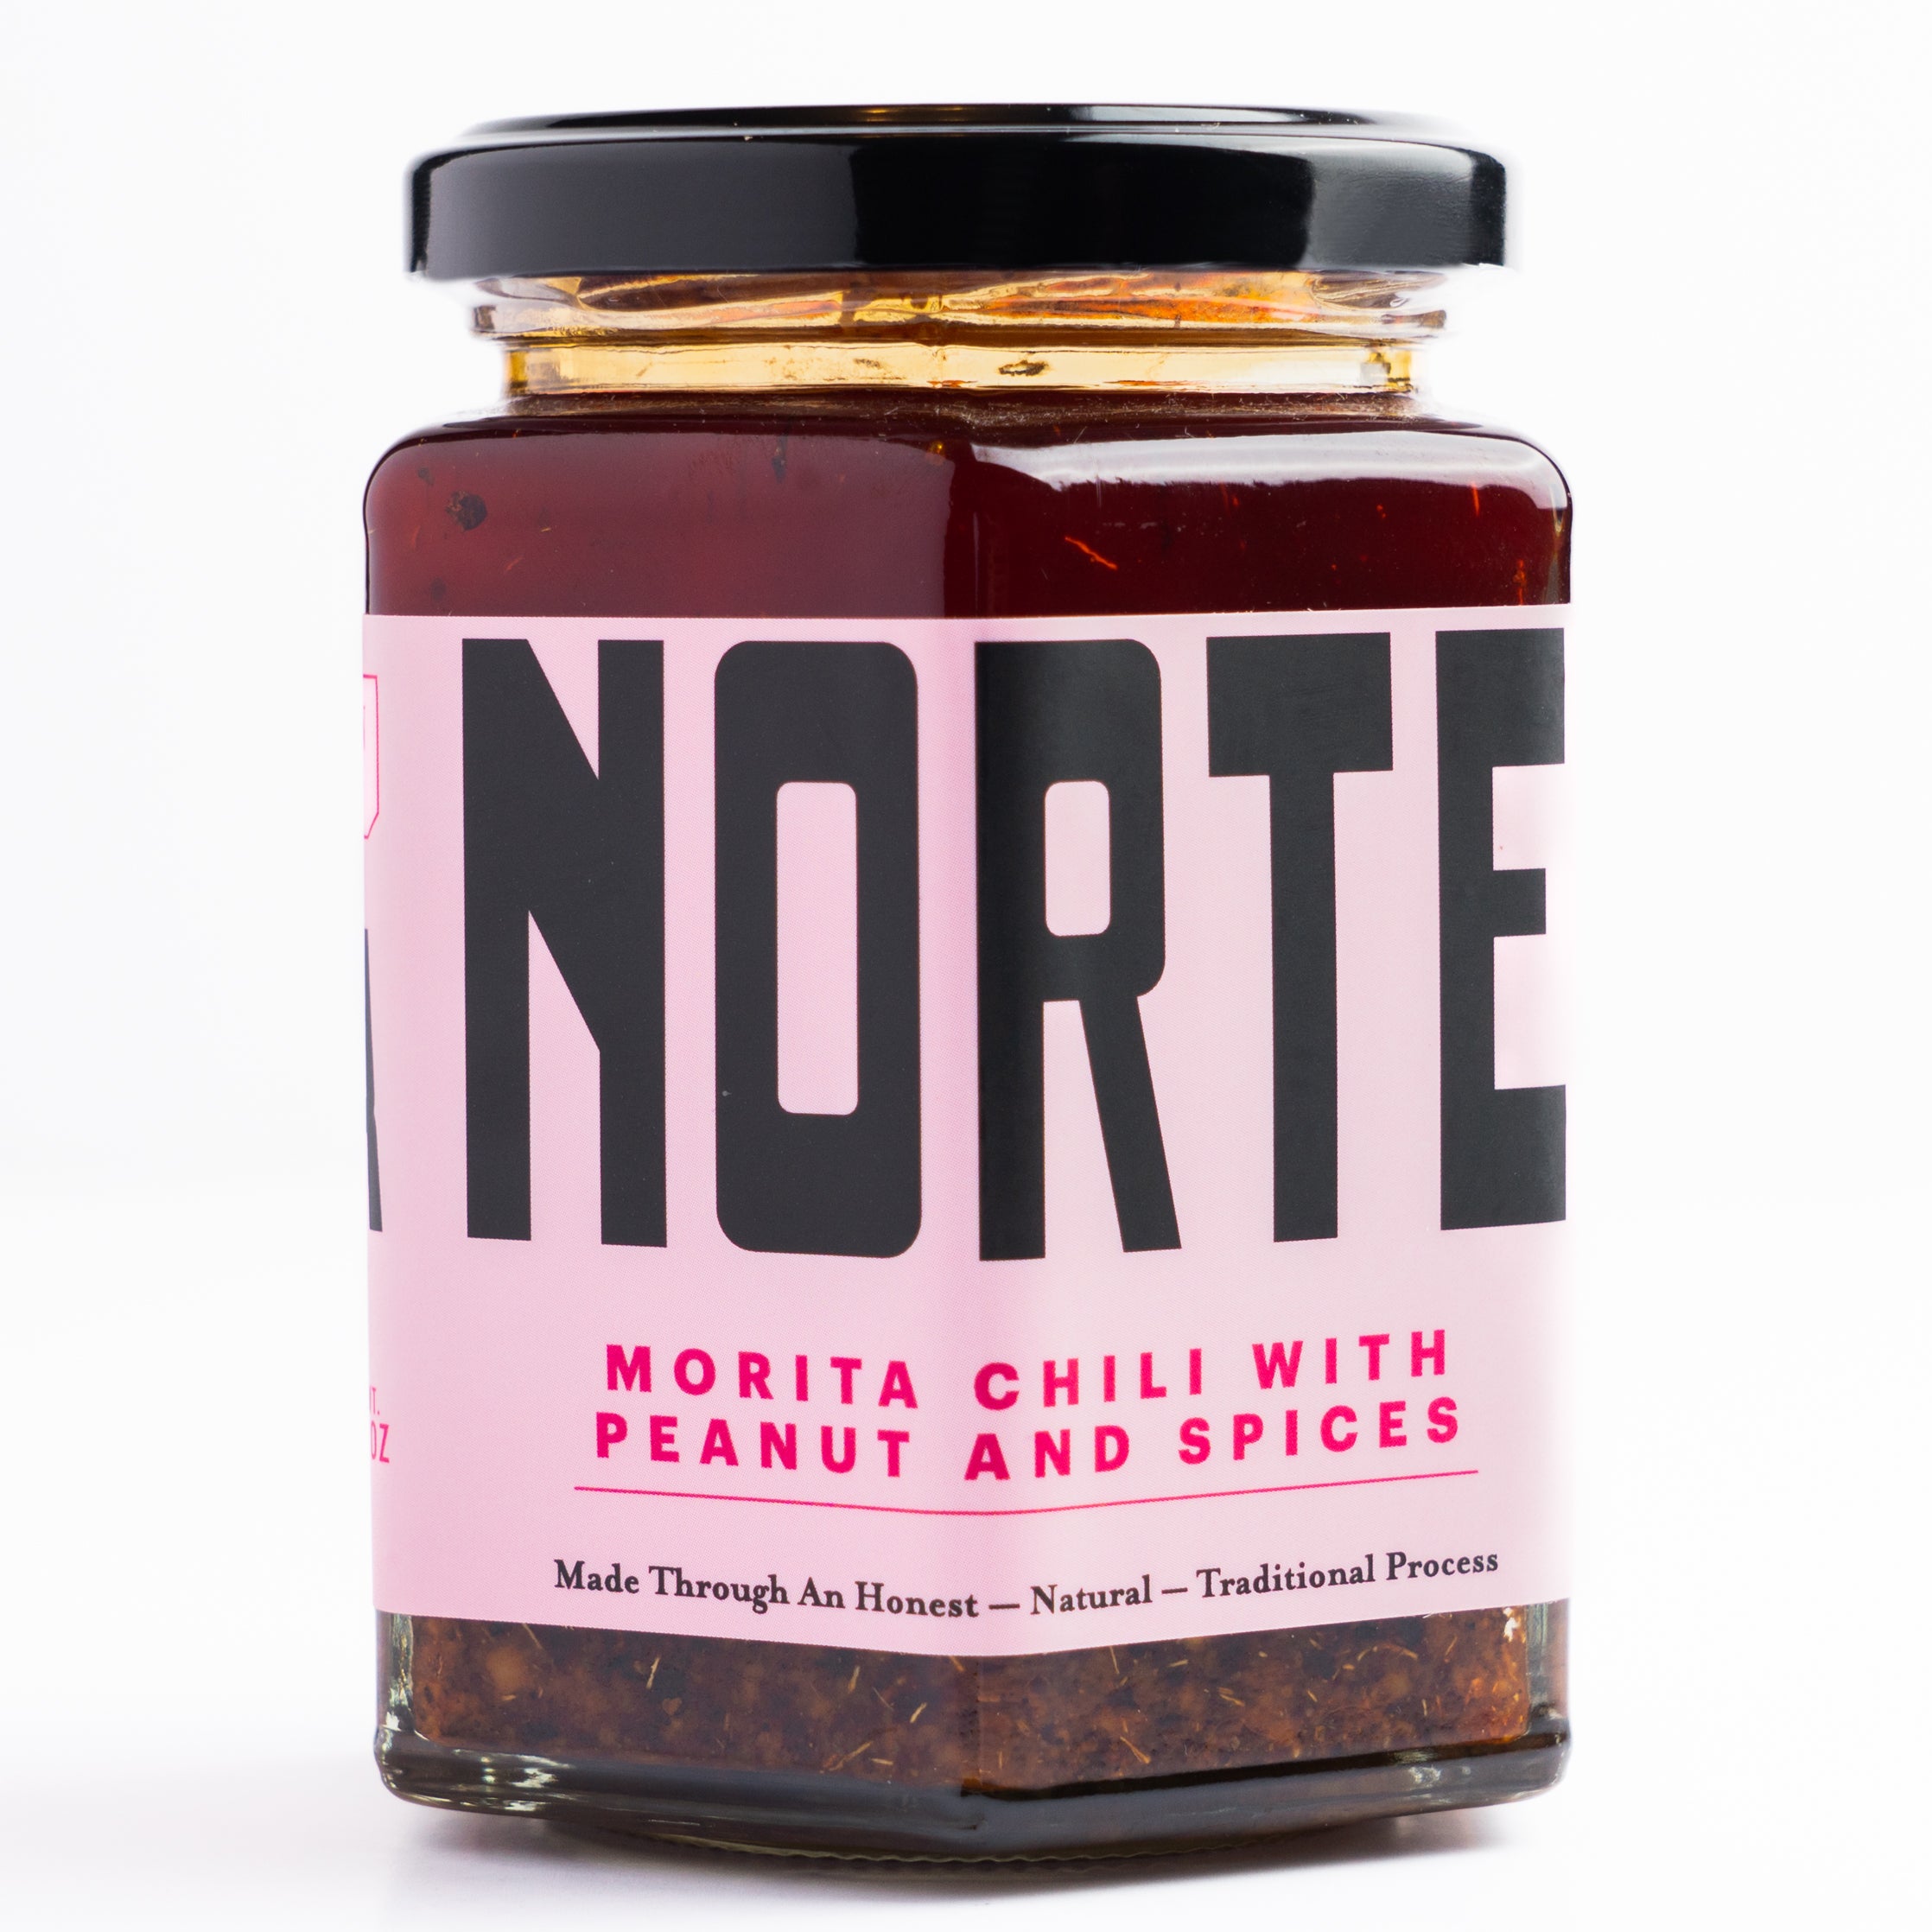 Morita Chili with Peanuts and Spices